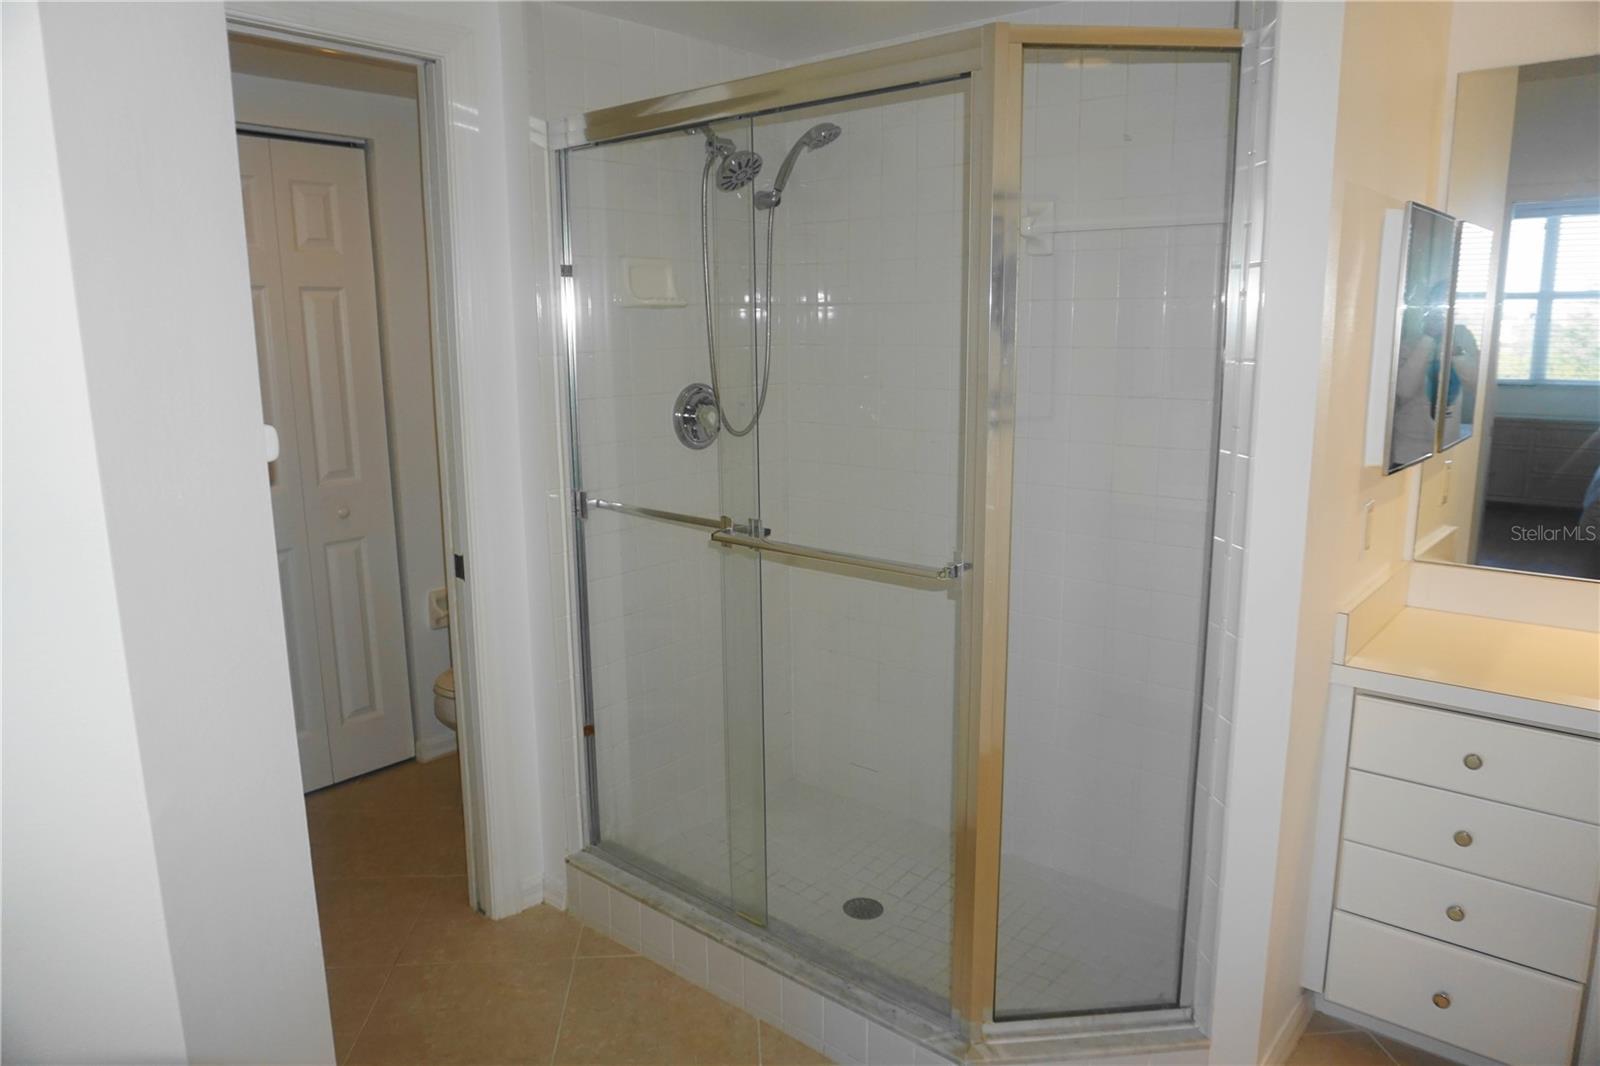 along with a large, comfortable shower